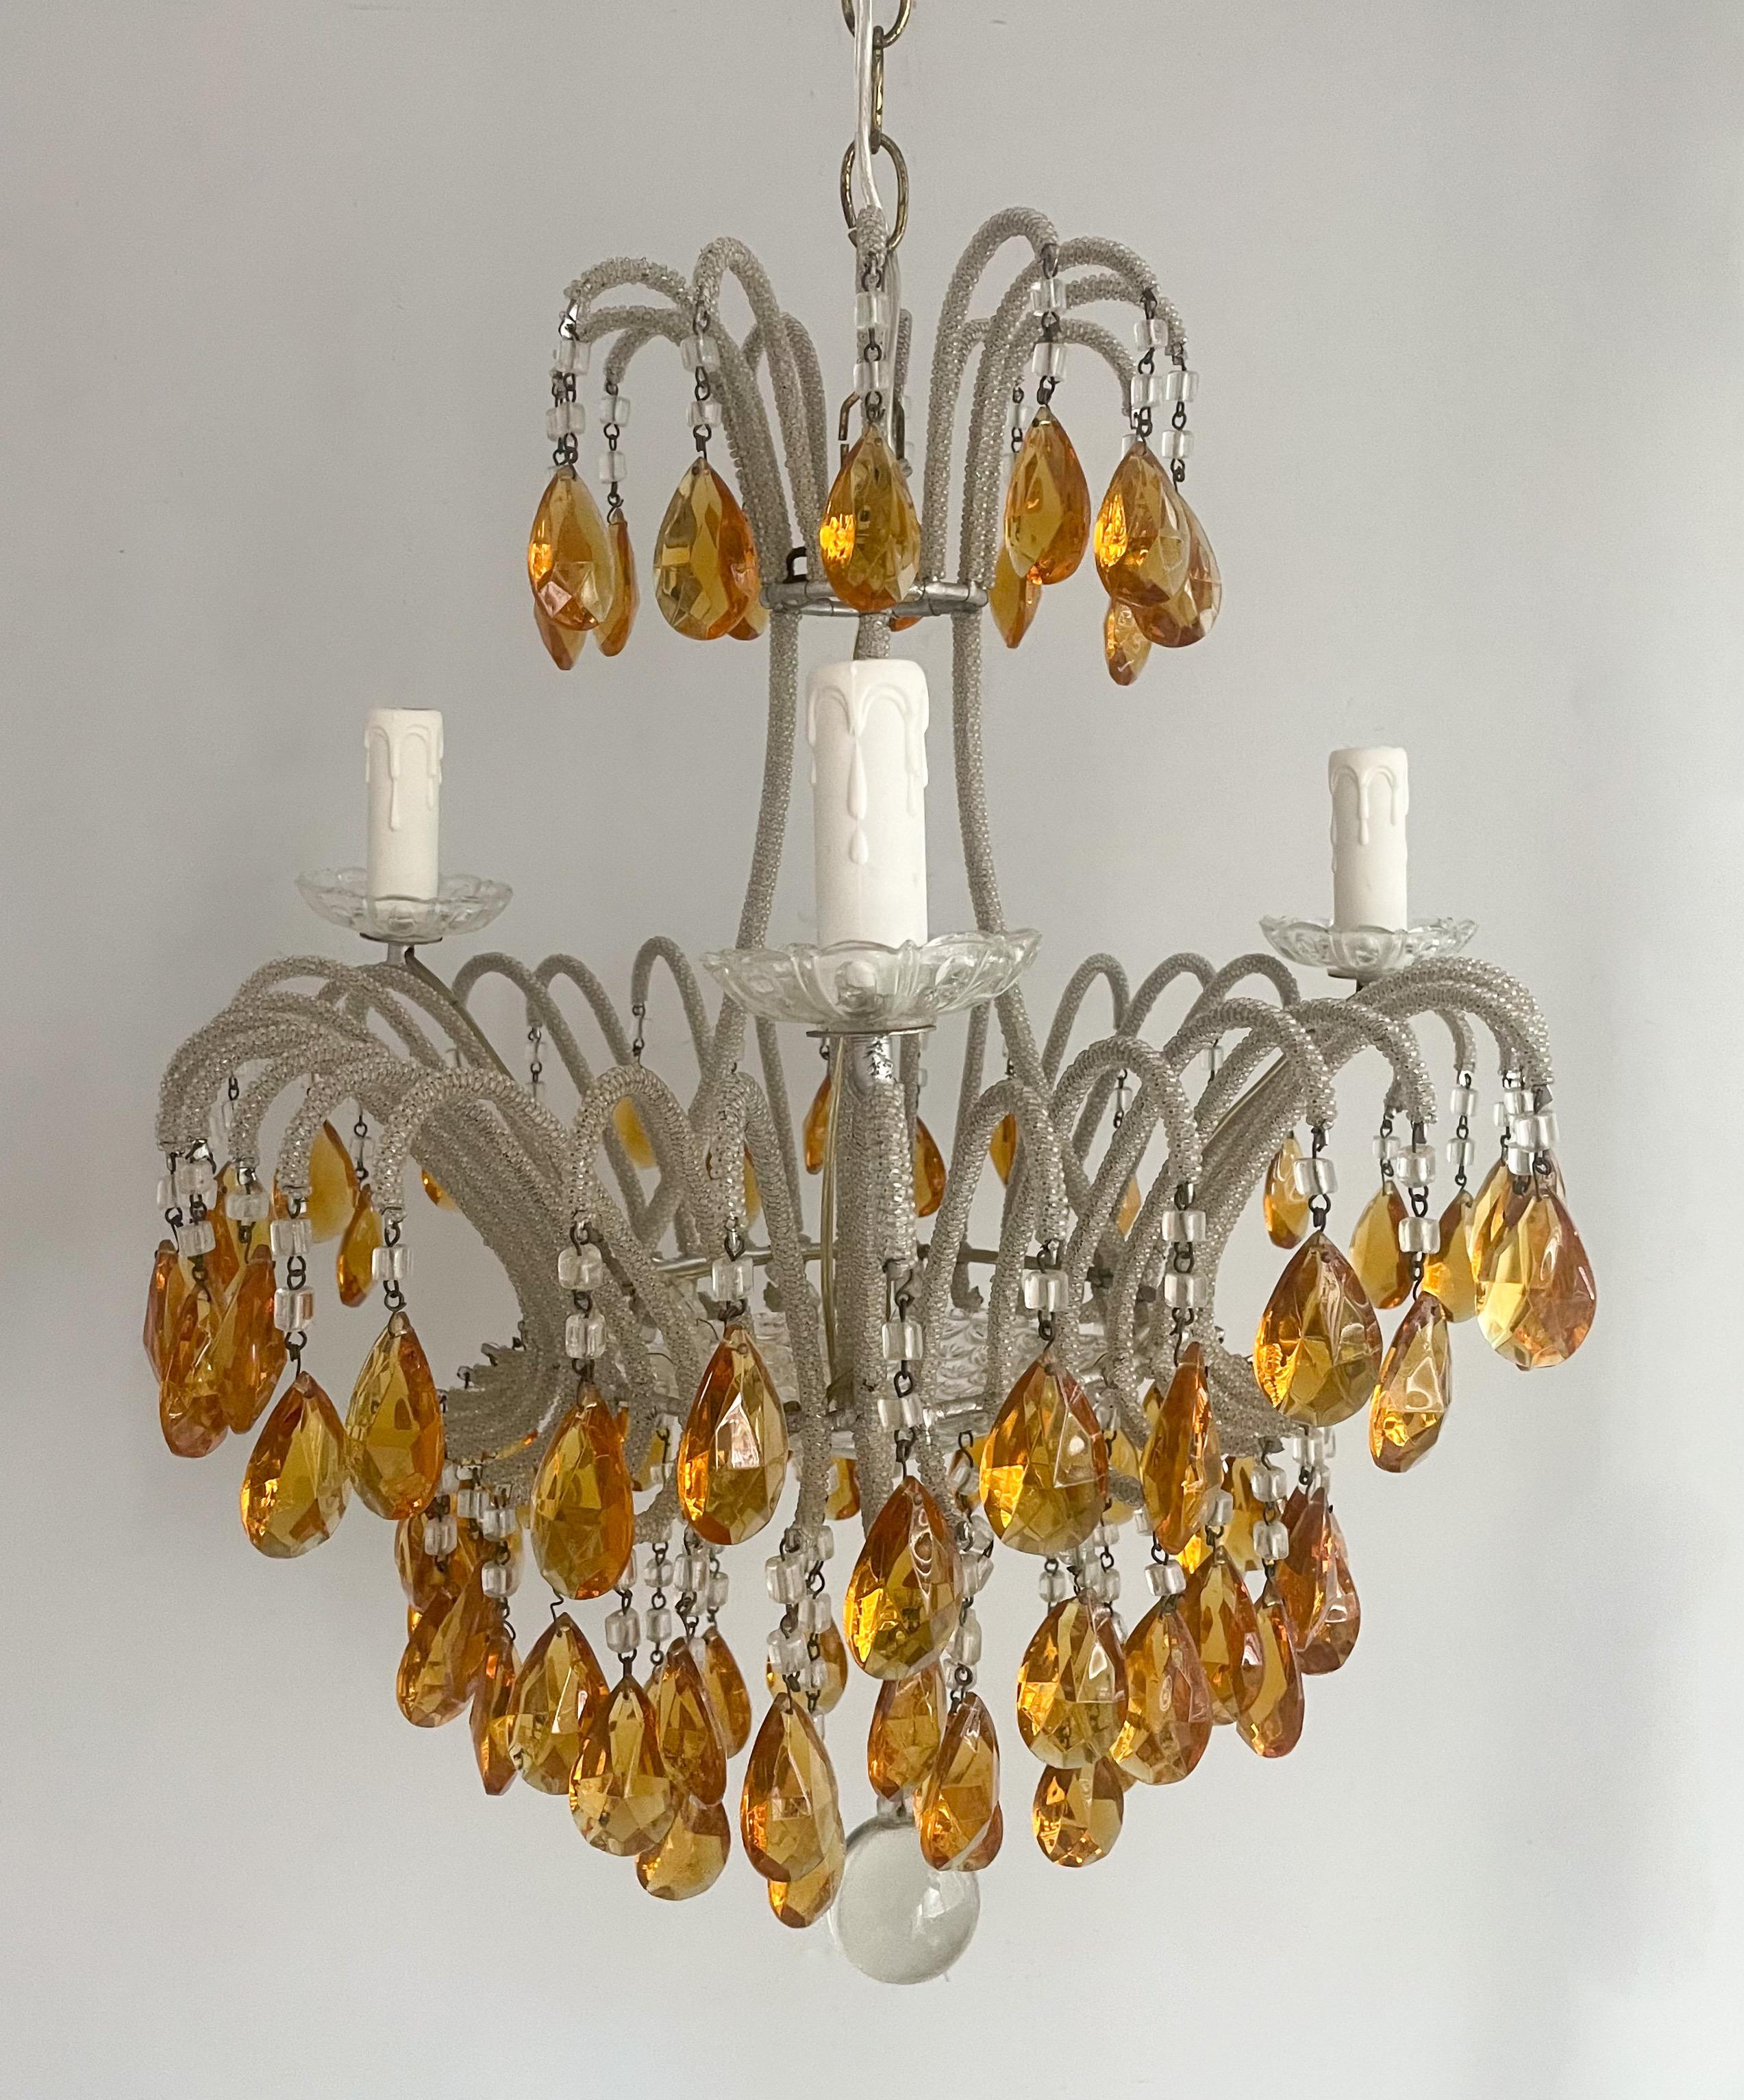 Wonderful, Italian 1940s crystal beaded chandelier with light amber faceted prisms.

The chandelier consists of scrolled iron frame wrapped in tiny silvered glass beads and decorated with macaroni glass beads and light amber prisms. There’s a